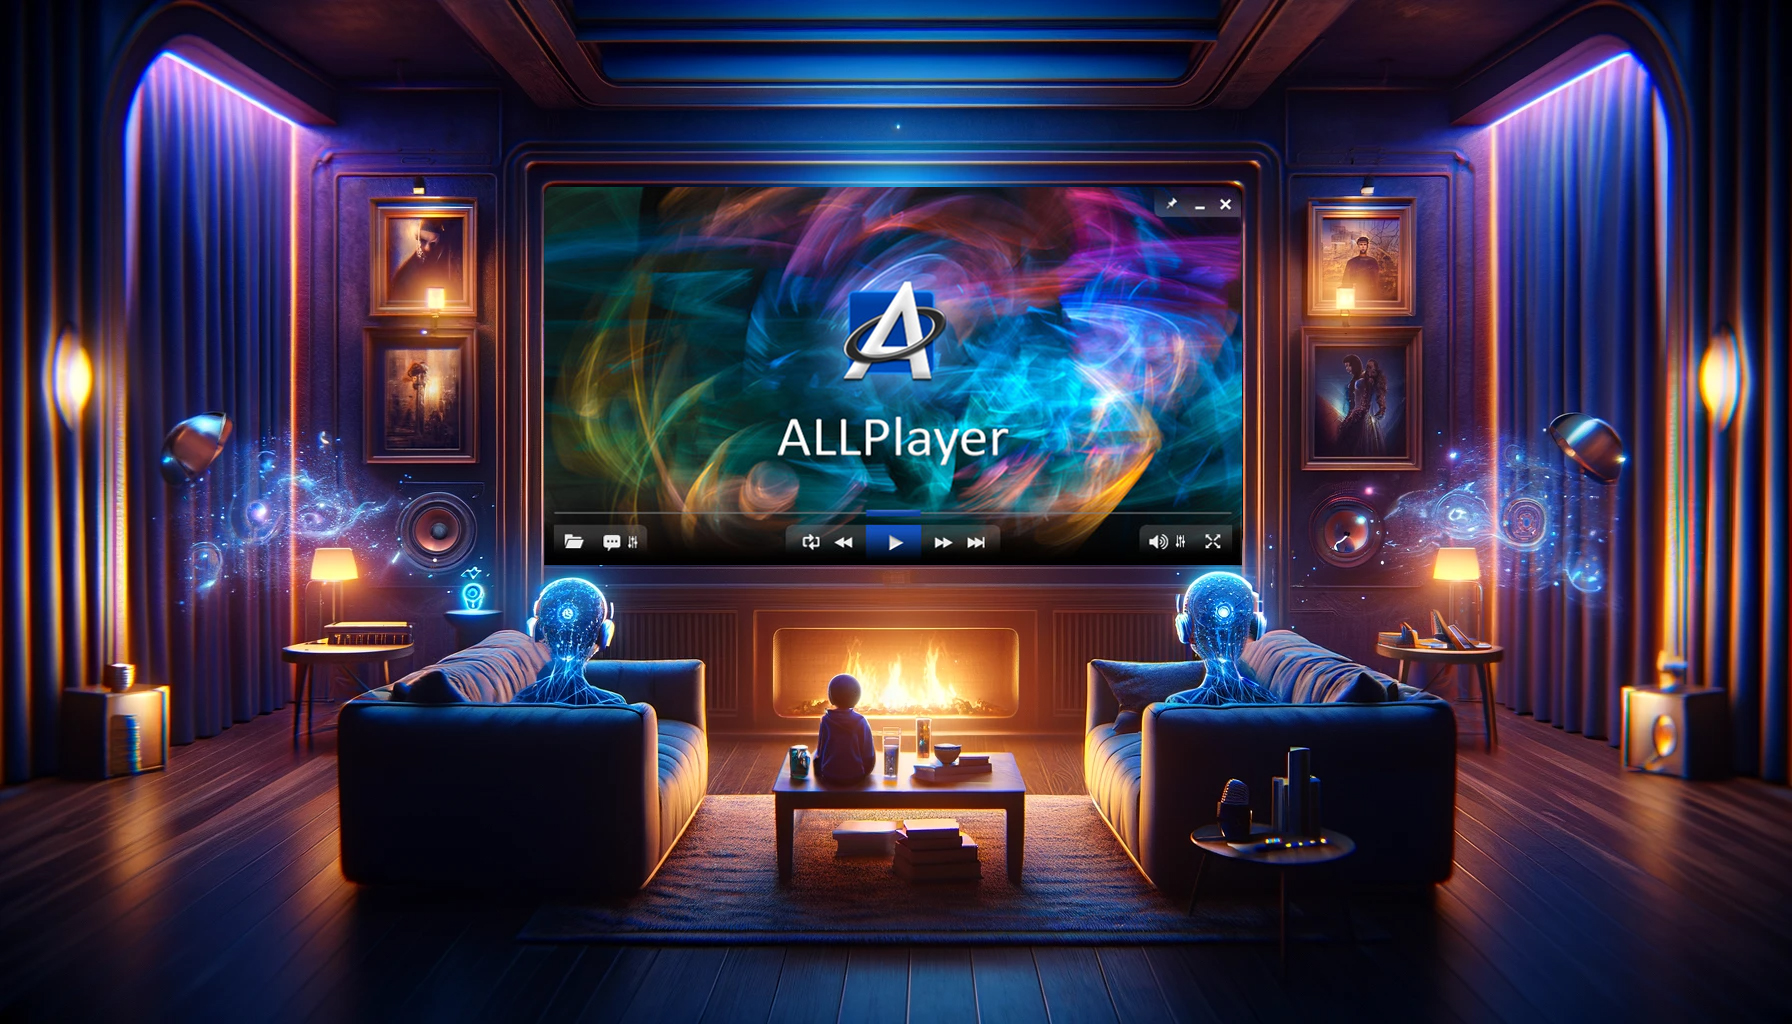 Introducing the Latest ALLPlayer 9.1 with Revolutionary AI Voice-over!